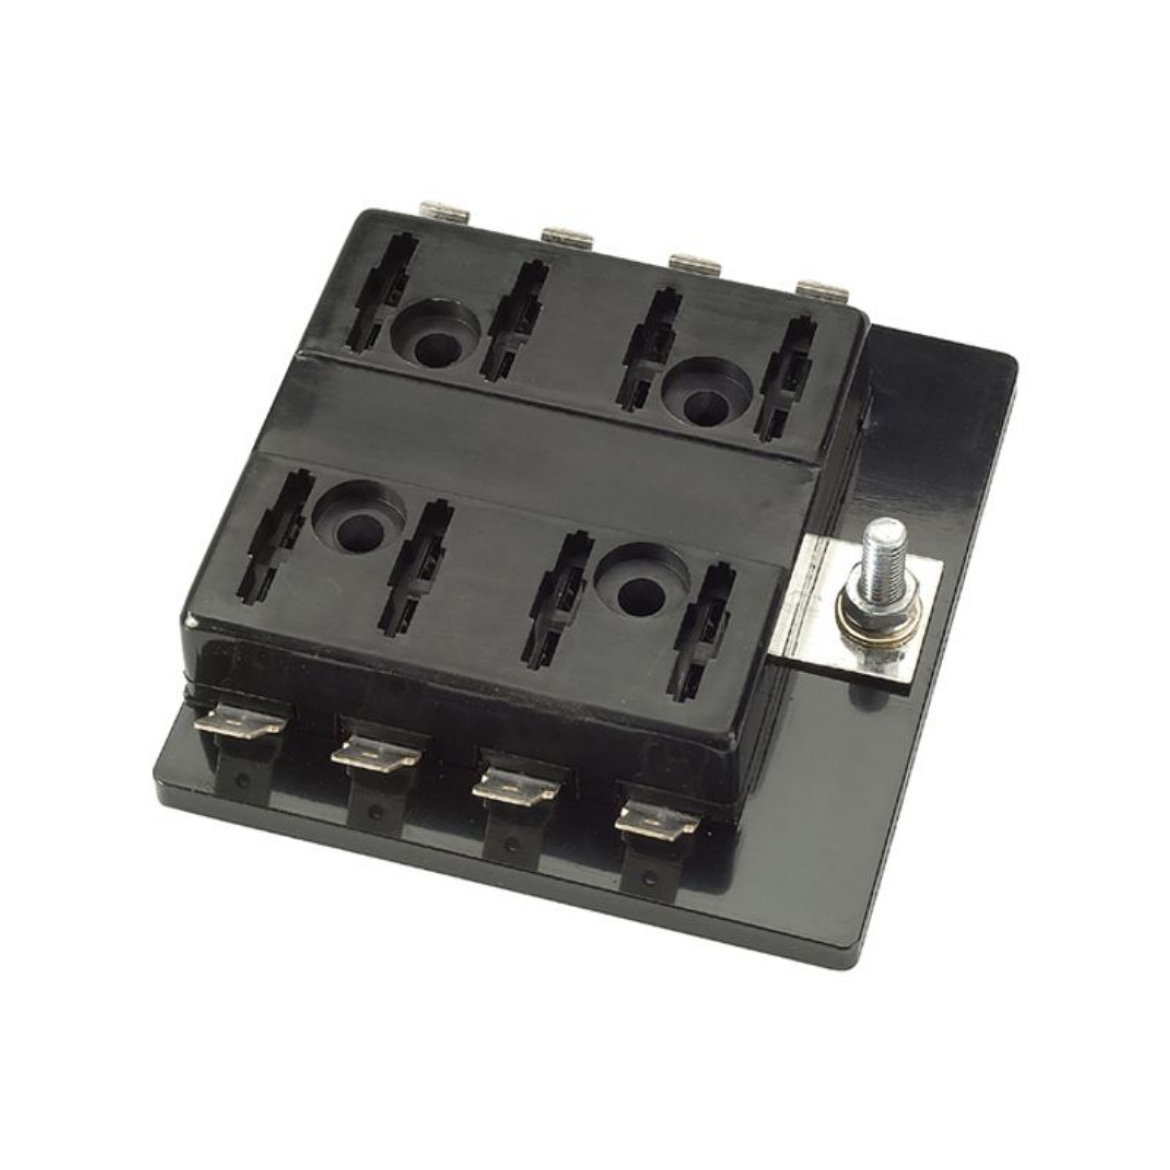 Picture of FUSE HOLDER 8 WAY STANDARD ATS BLADE WITH COMMON POS STUD